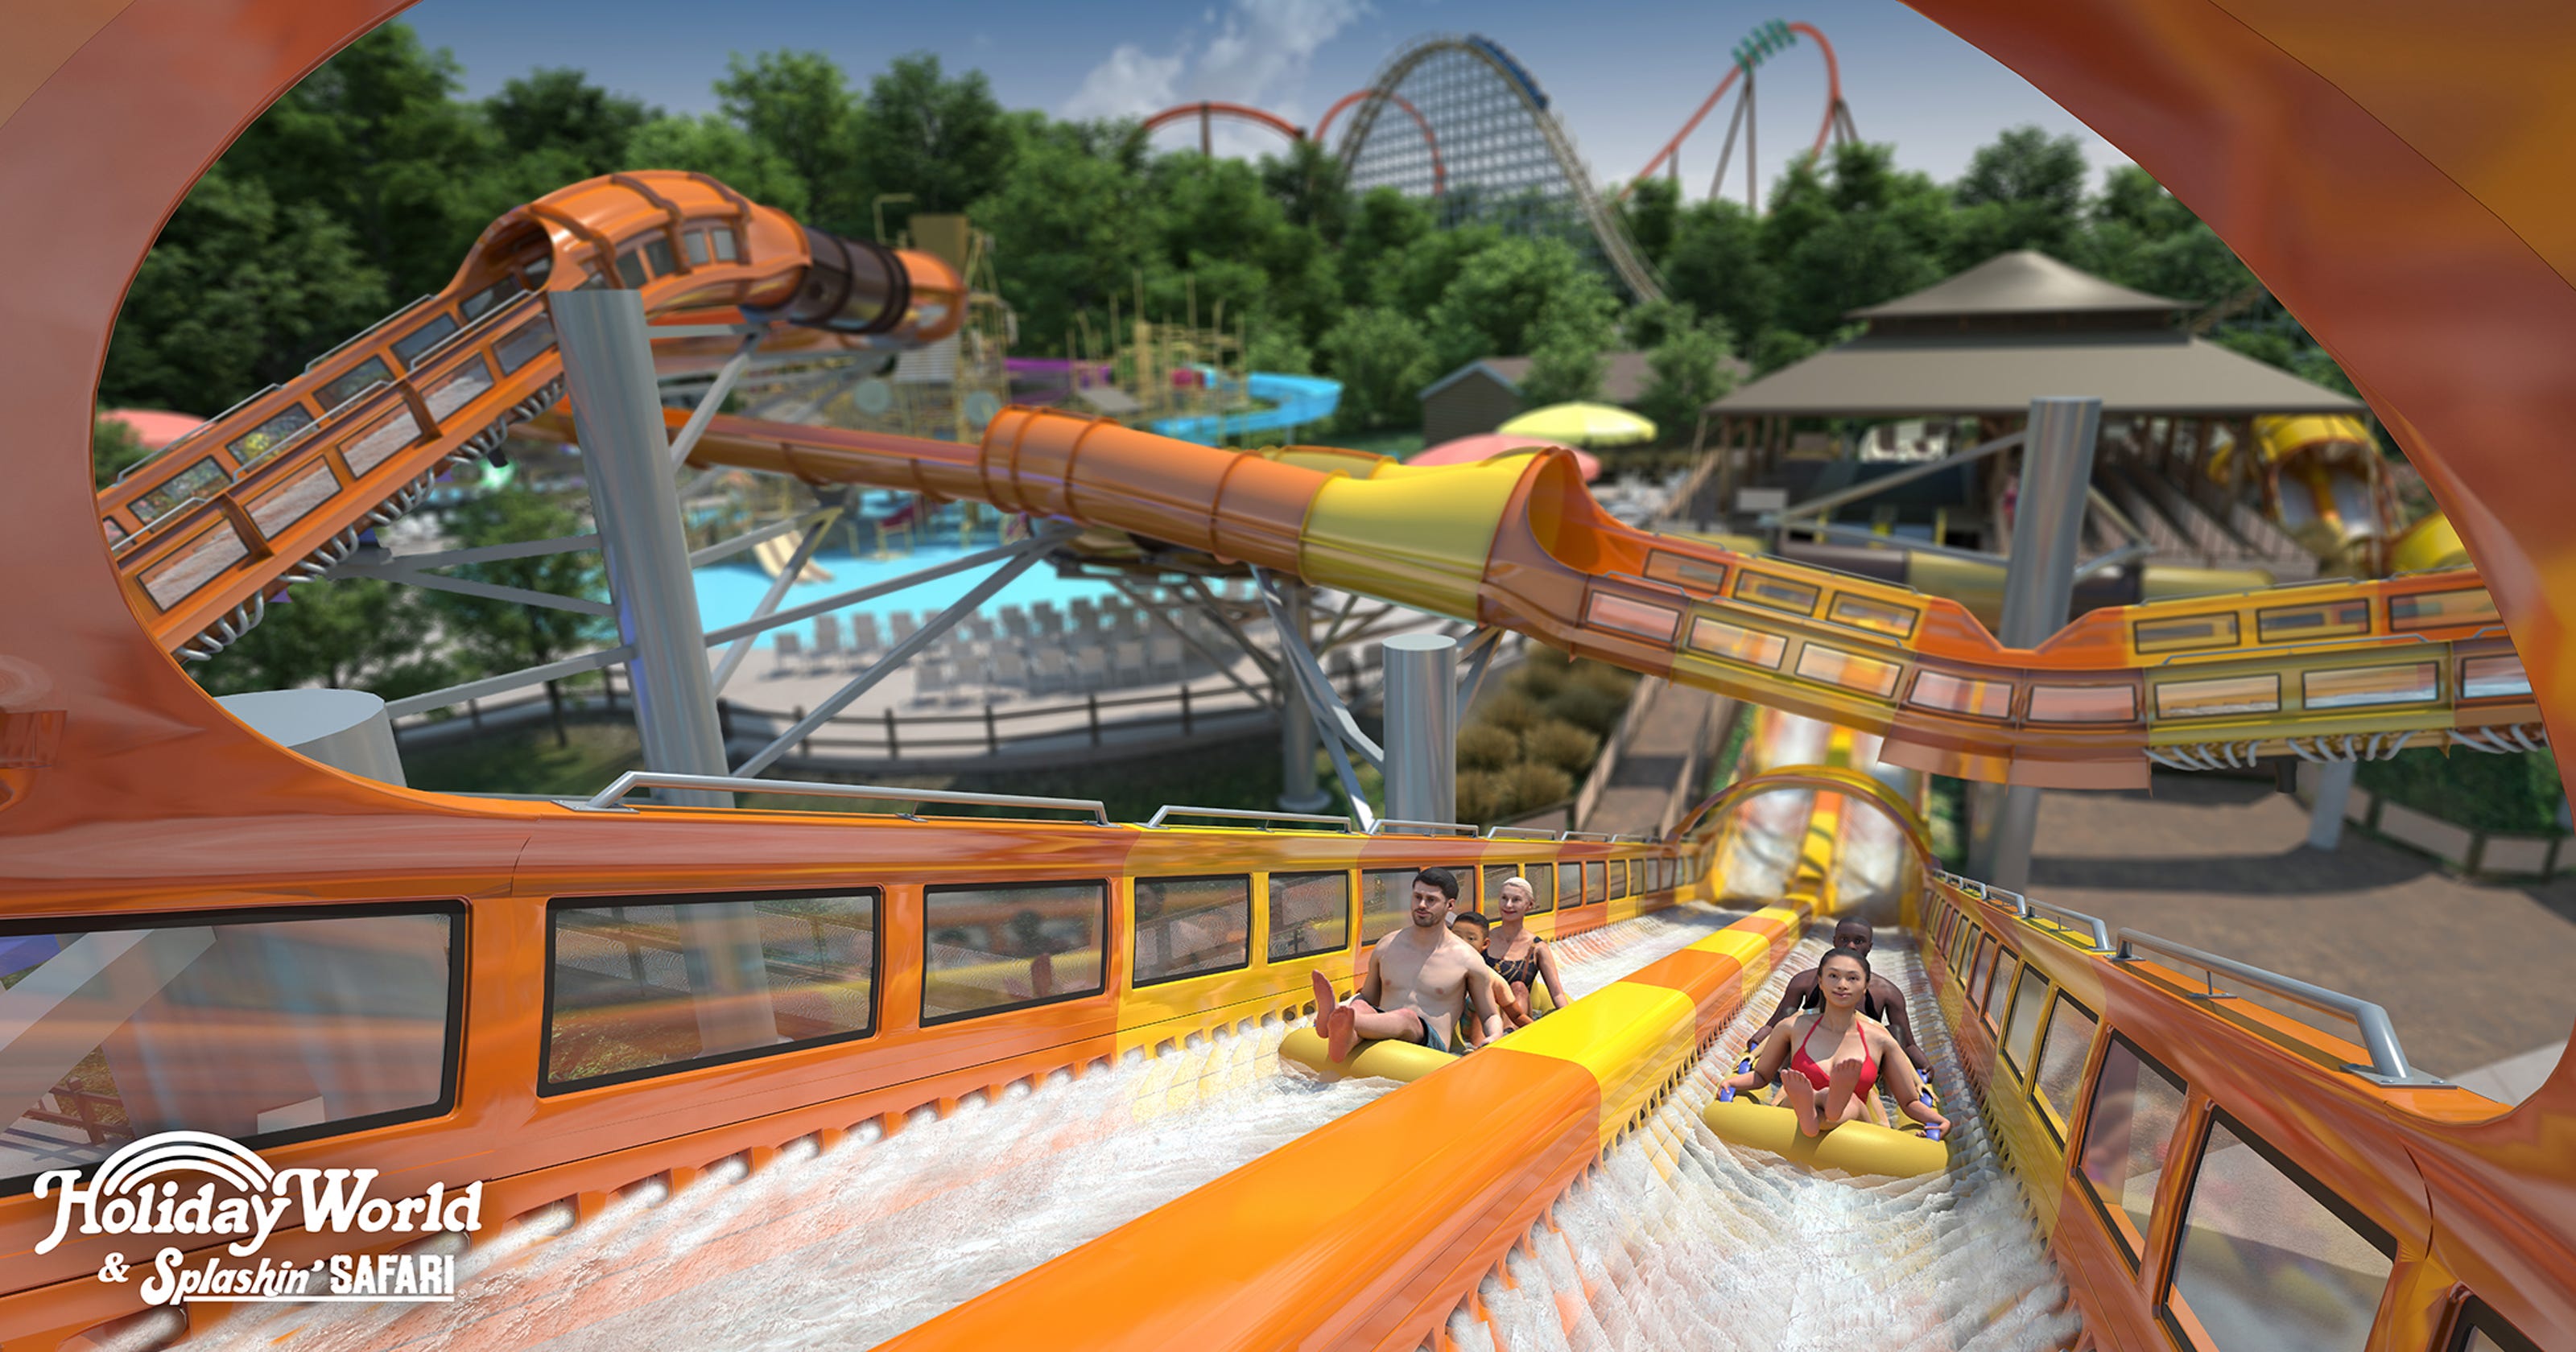 Holiday World announces new ride 'Cheetah Chase' for 2020